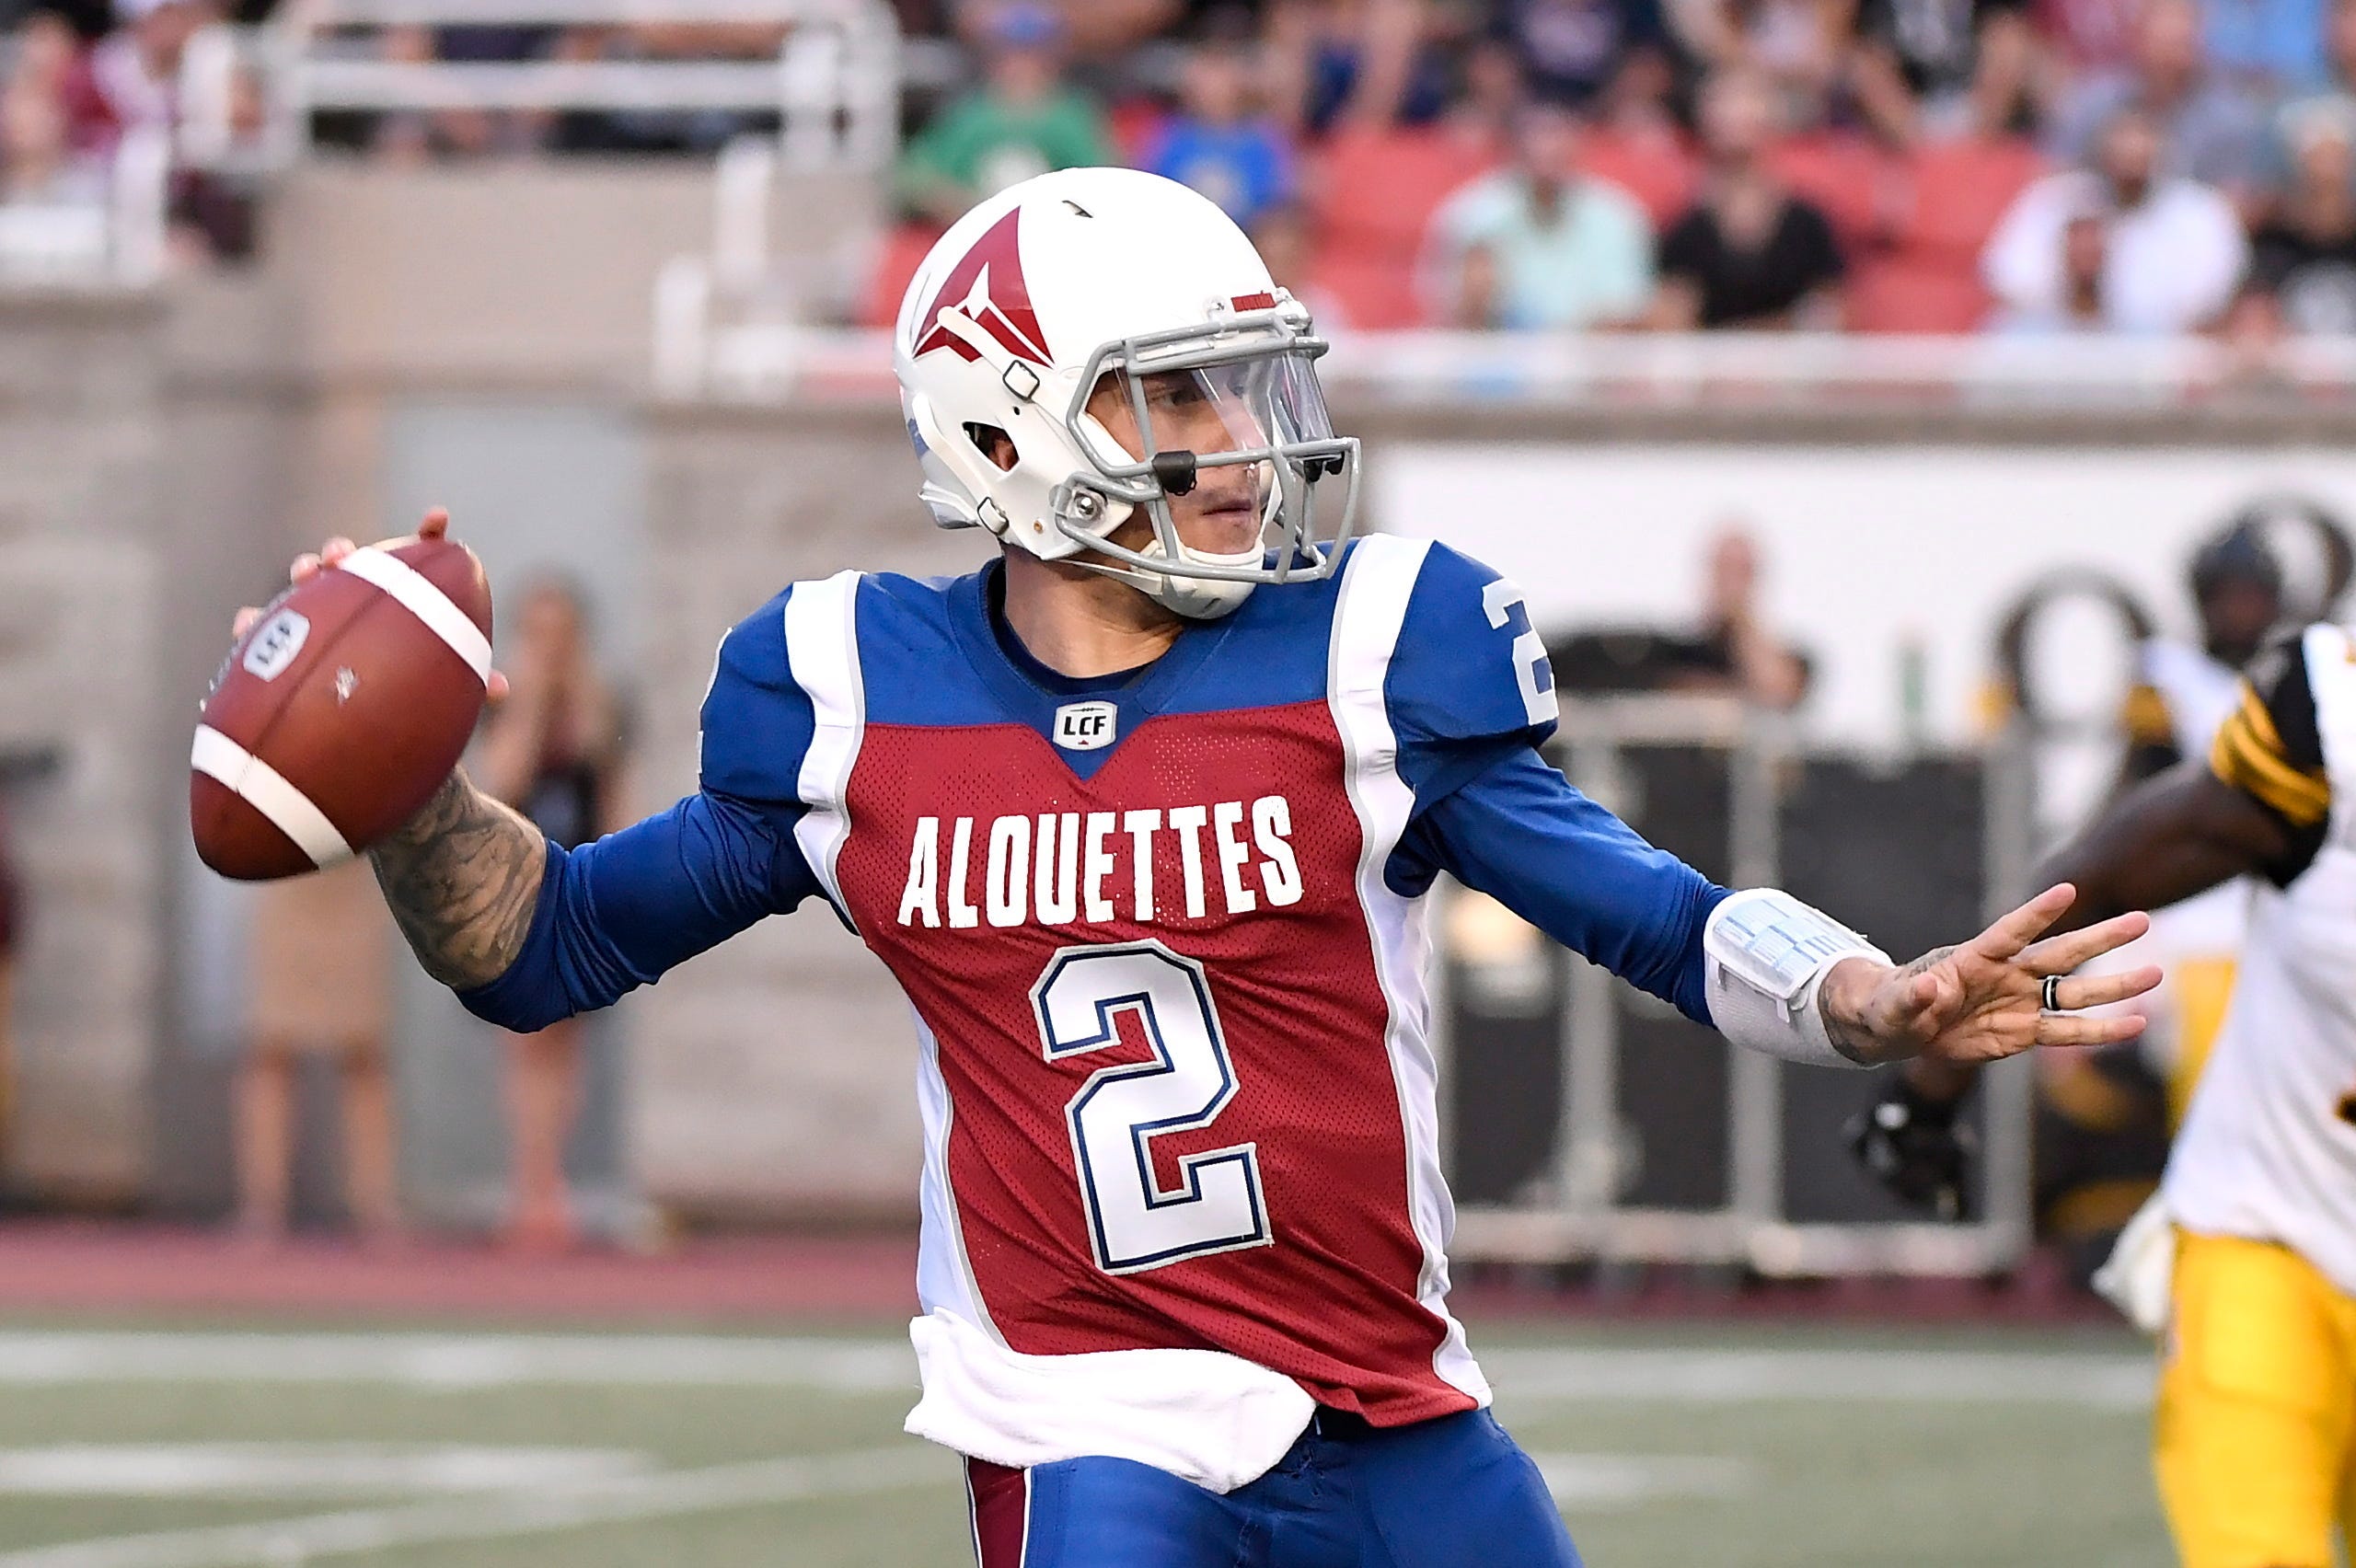 Johnny Manziel has rough CFL debut for 